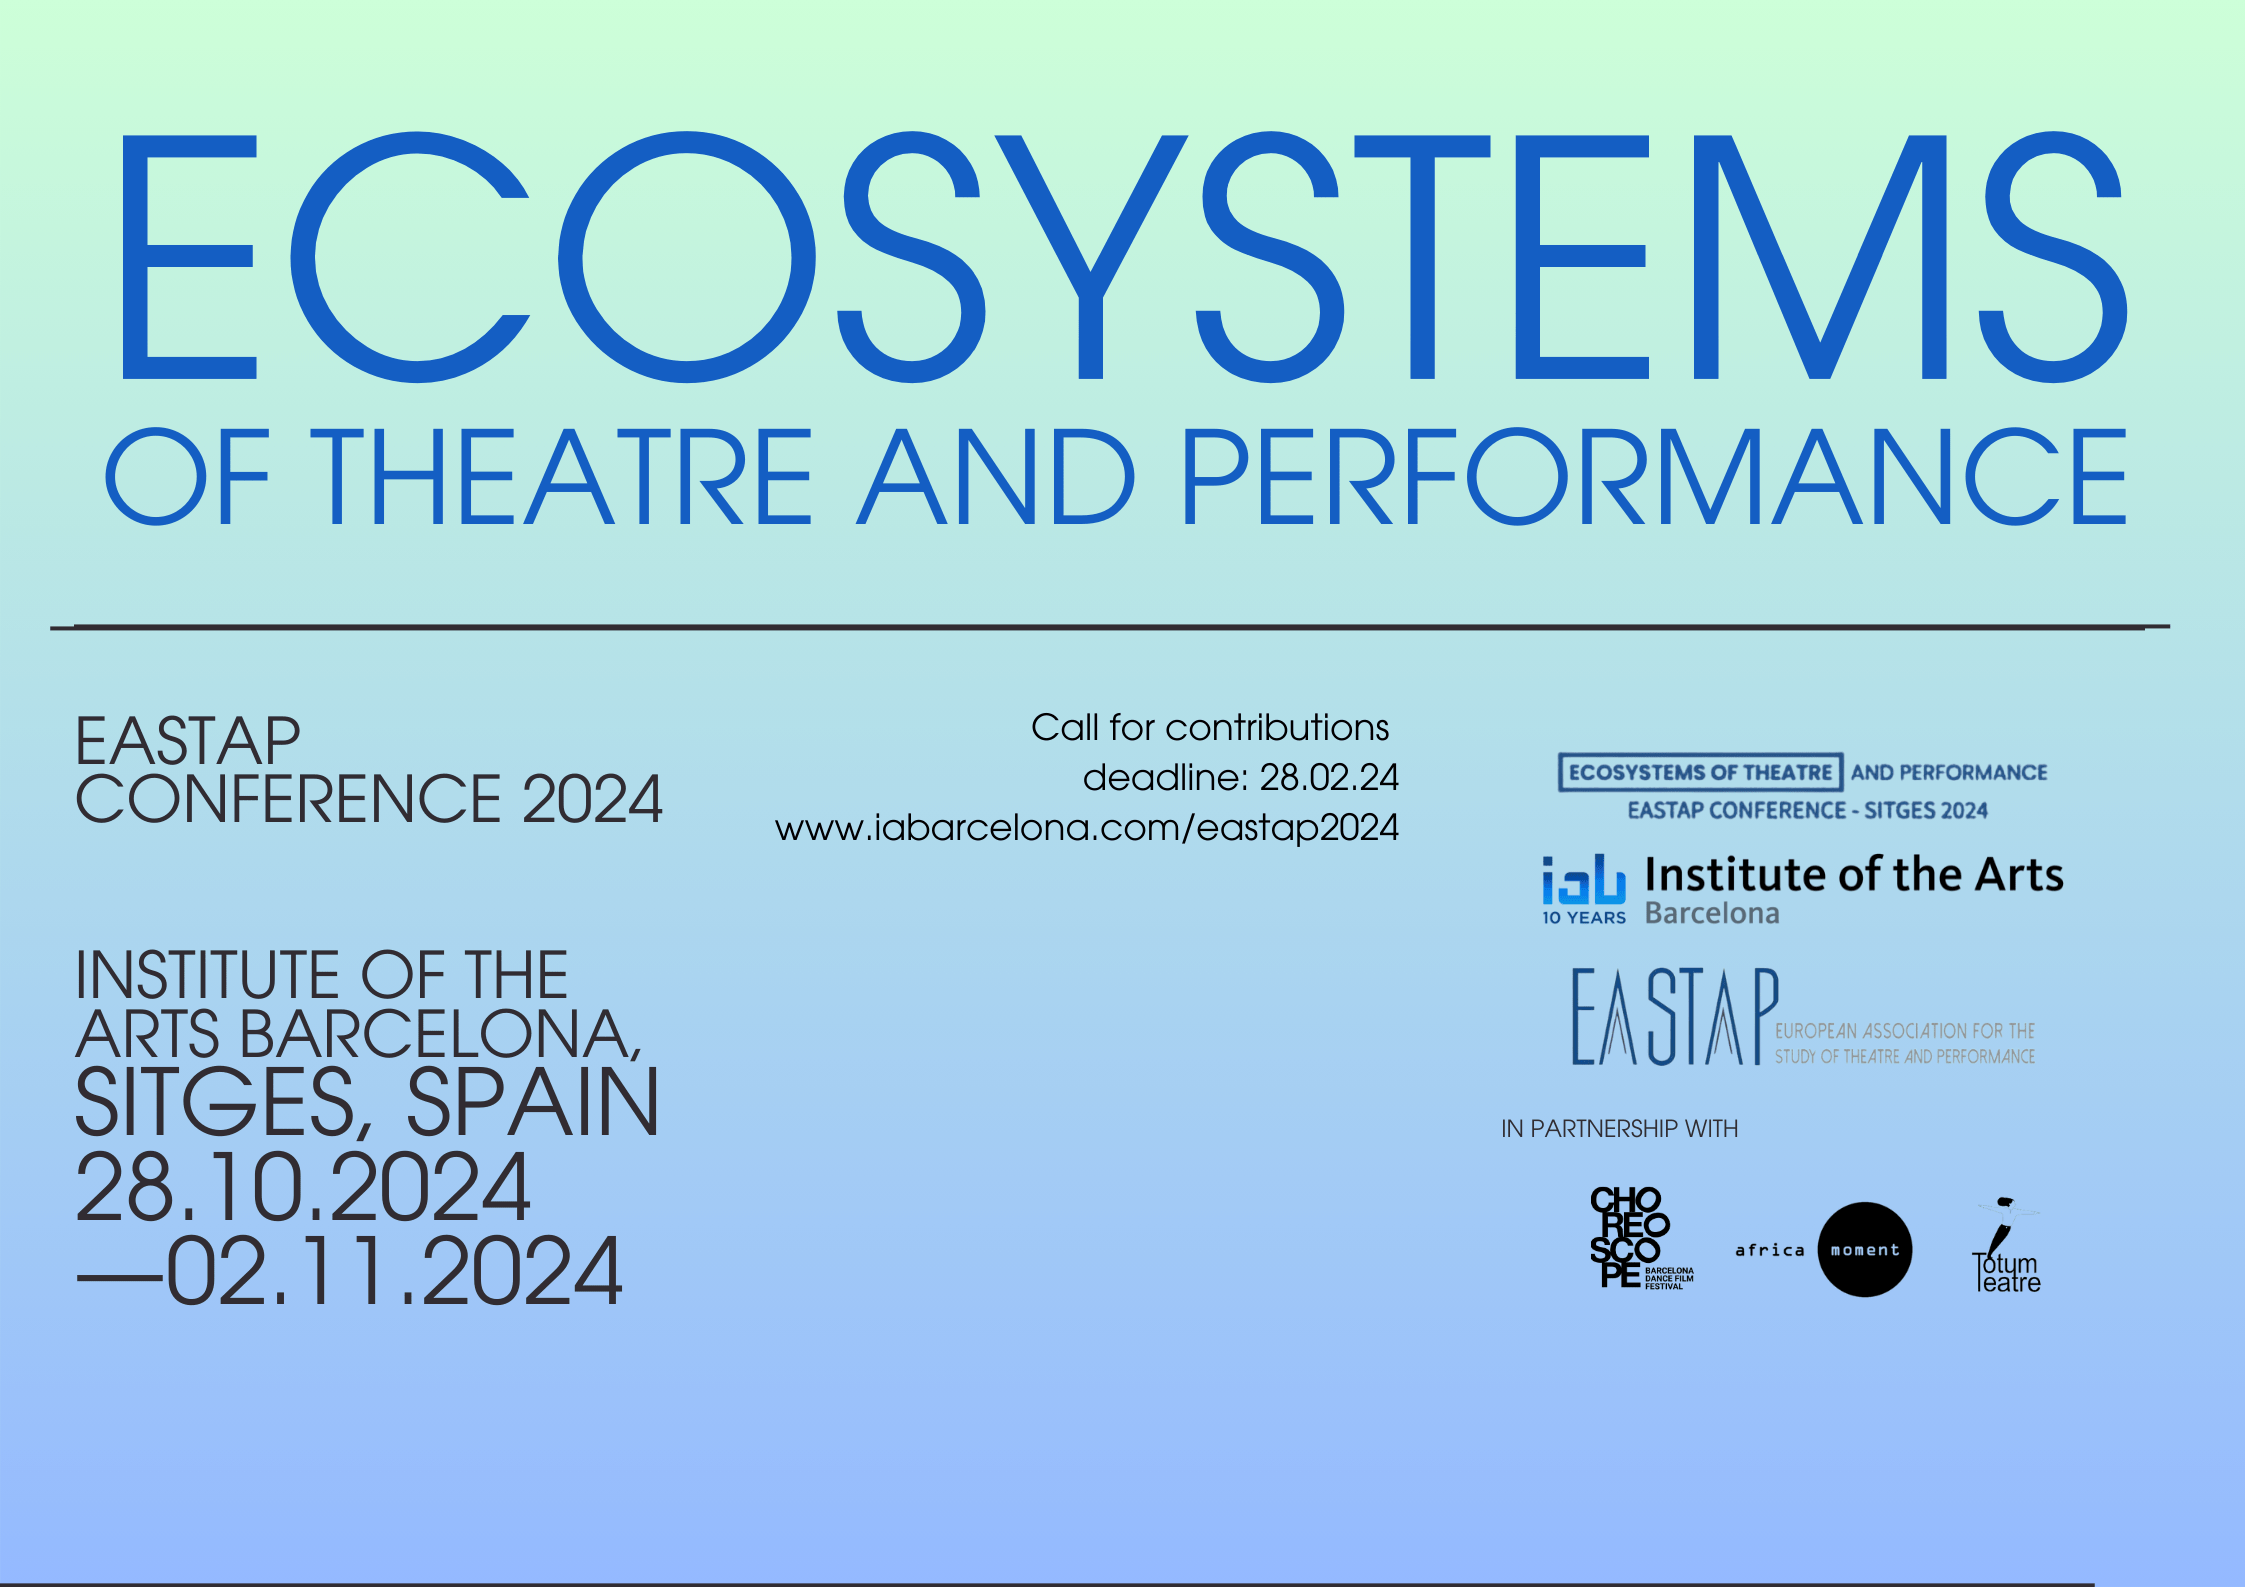 Ecosystems of Theatre and Performance